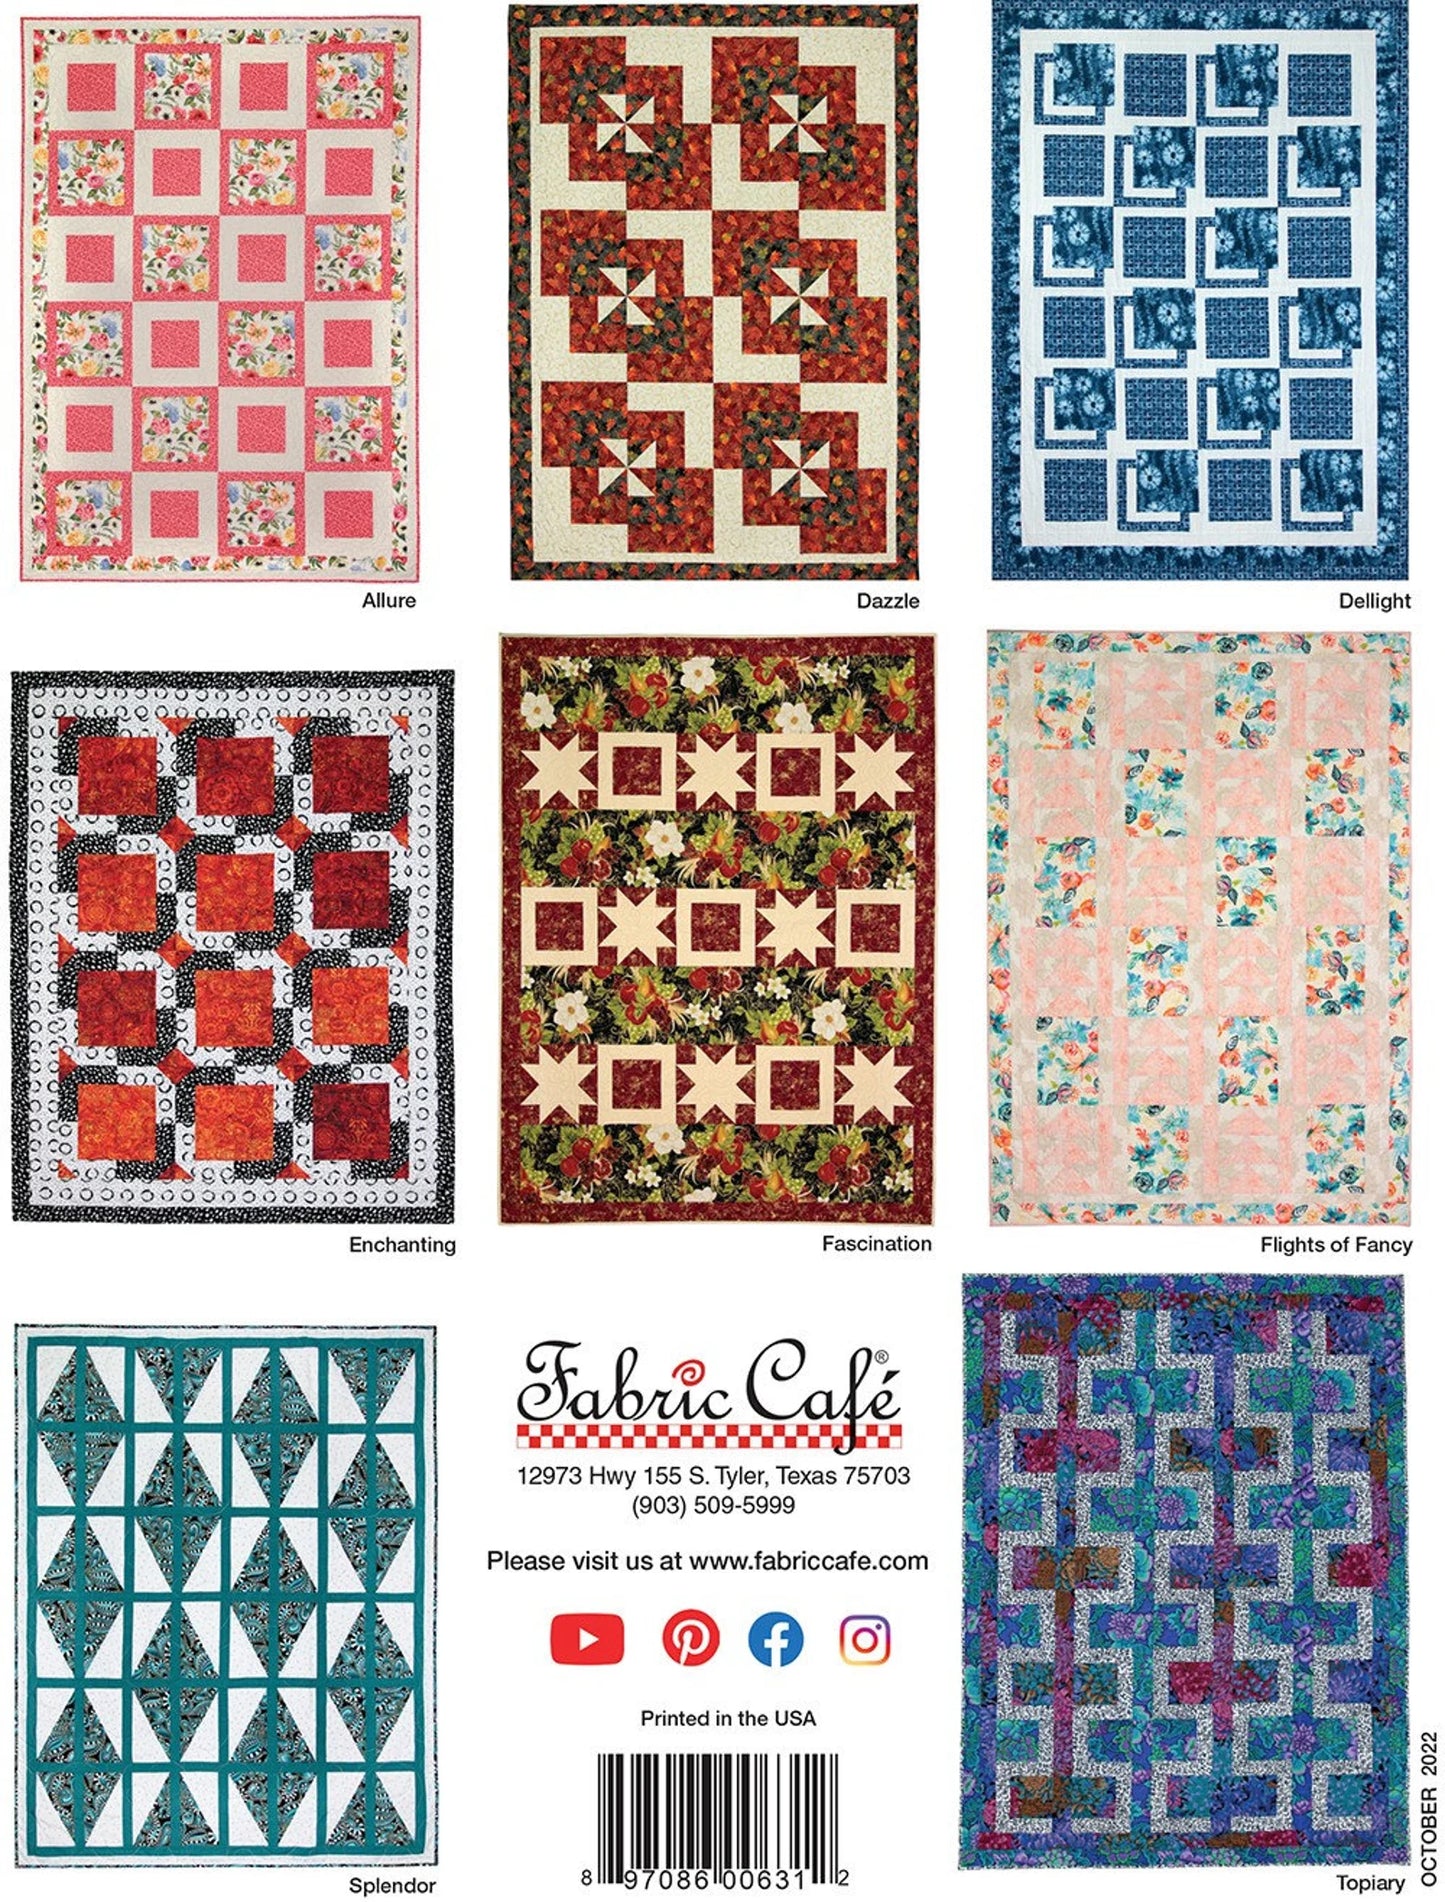 THE MAGIC OF 3 YARD QUILTS 8 quilt designs DONNA ROBERTSON For FABRIC CAFE!